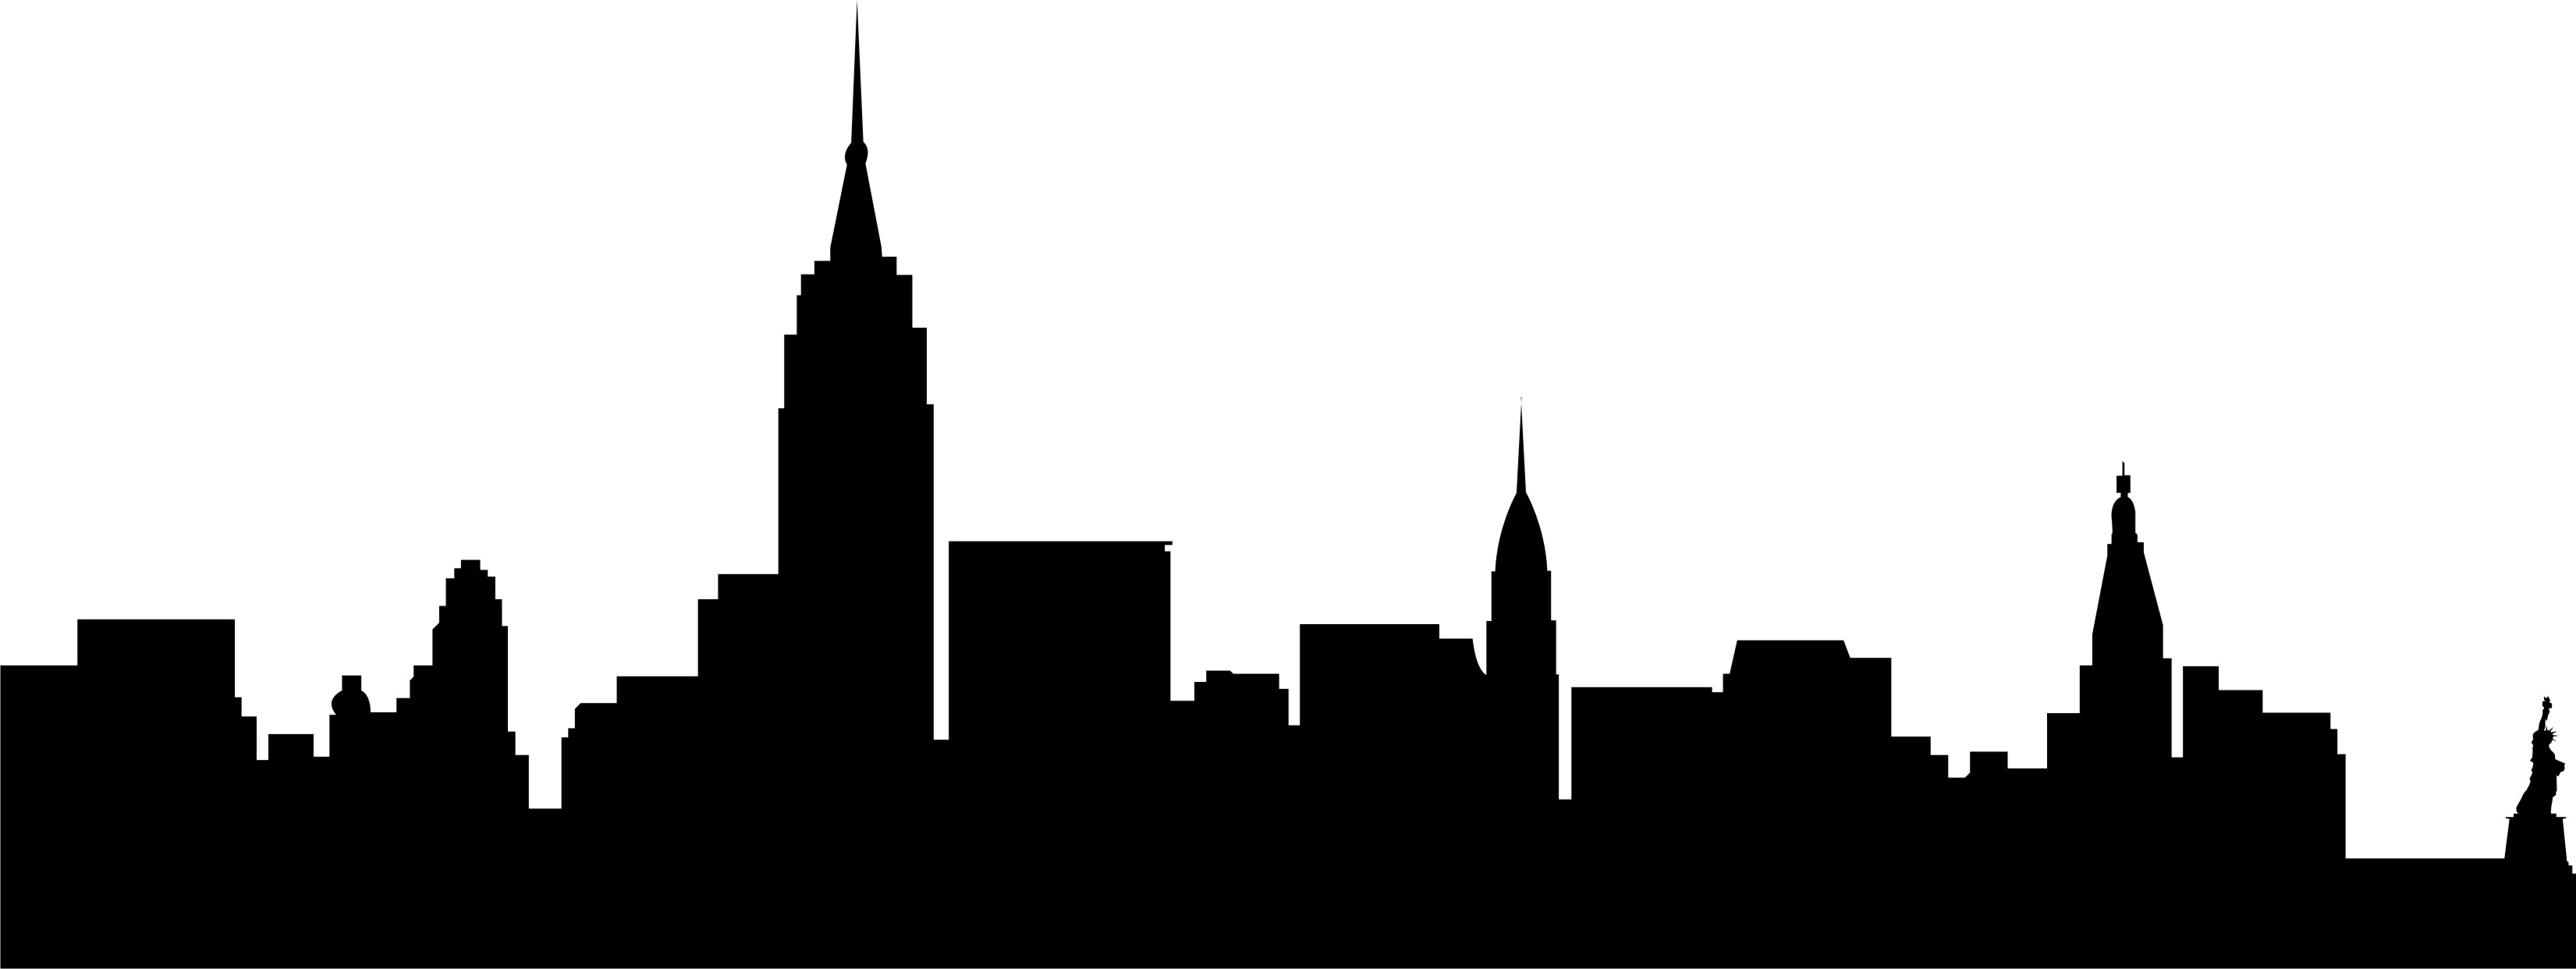 Cityscape and lake outline clipart black and white